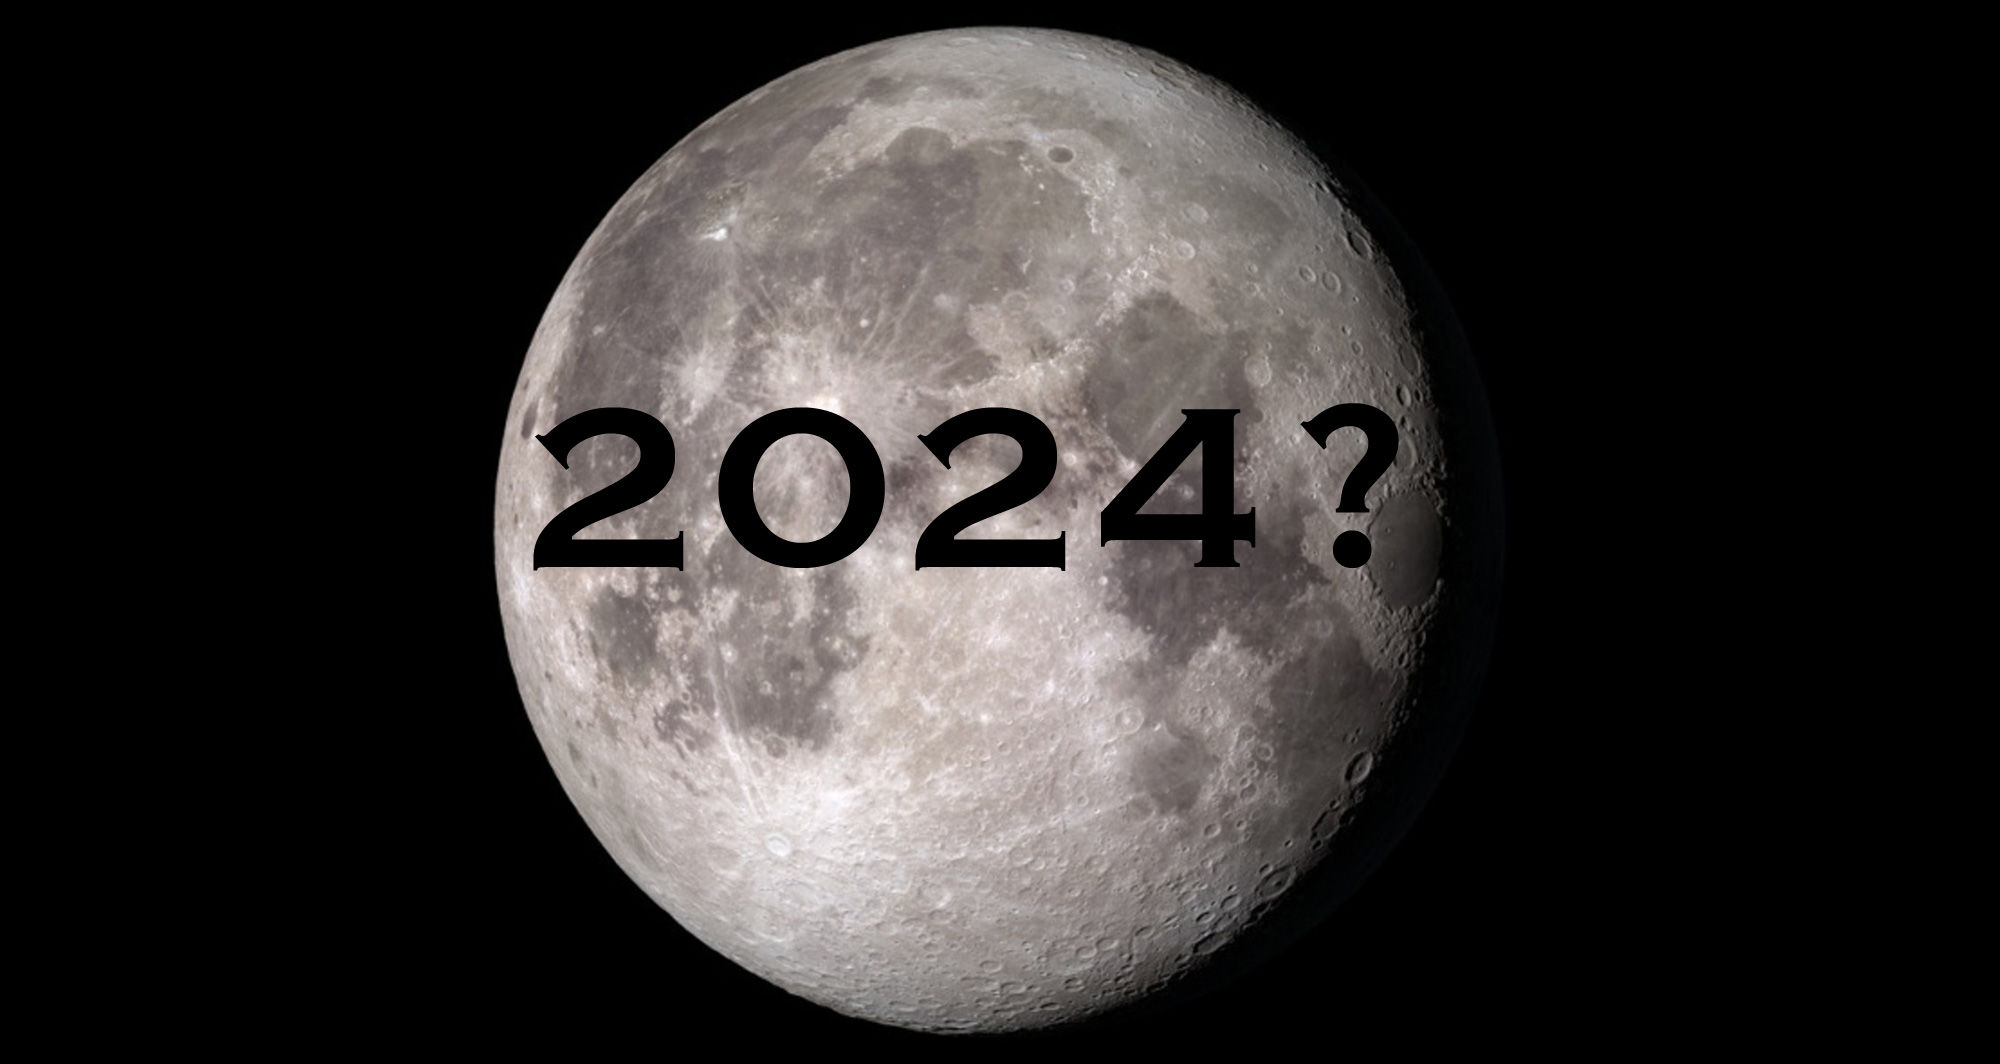 Can NASA send people back to the Moon by 2024? Credit: NASA's Scientific Visualization Studio